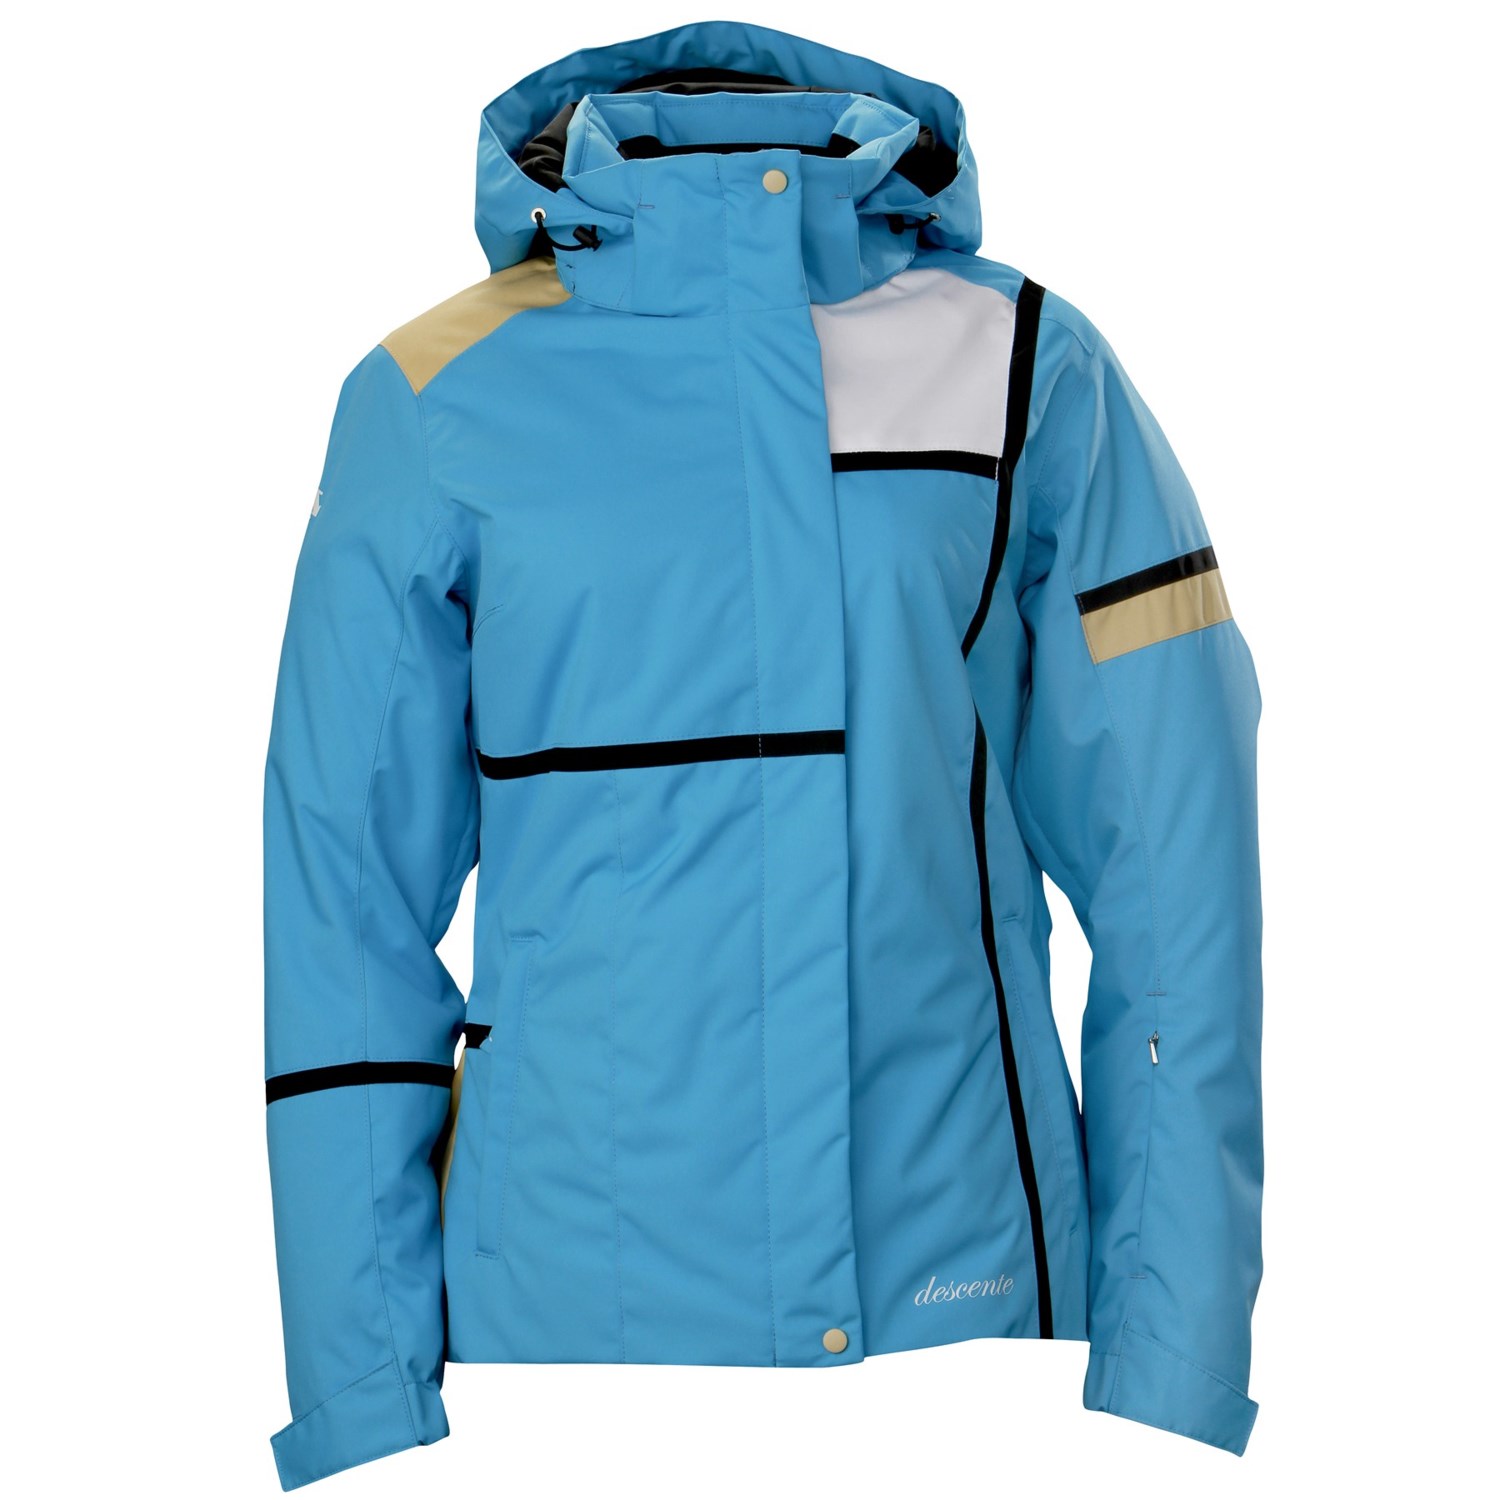 Descente Alexis Ski Jacket - Insulated (For Women) - Save 63%